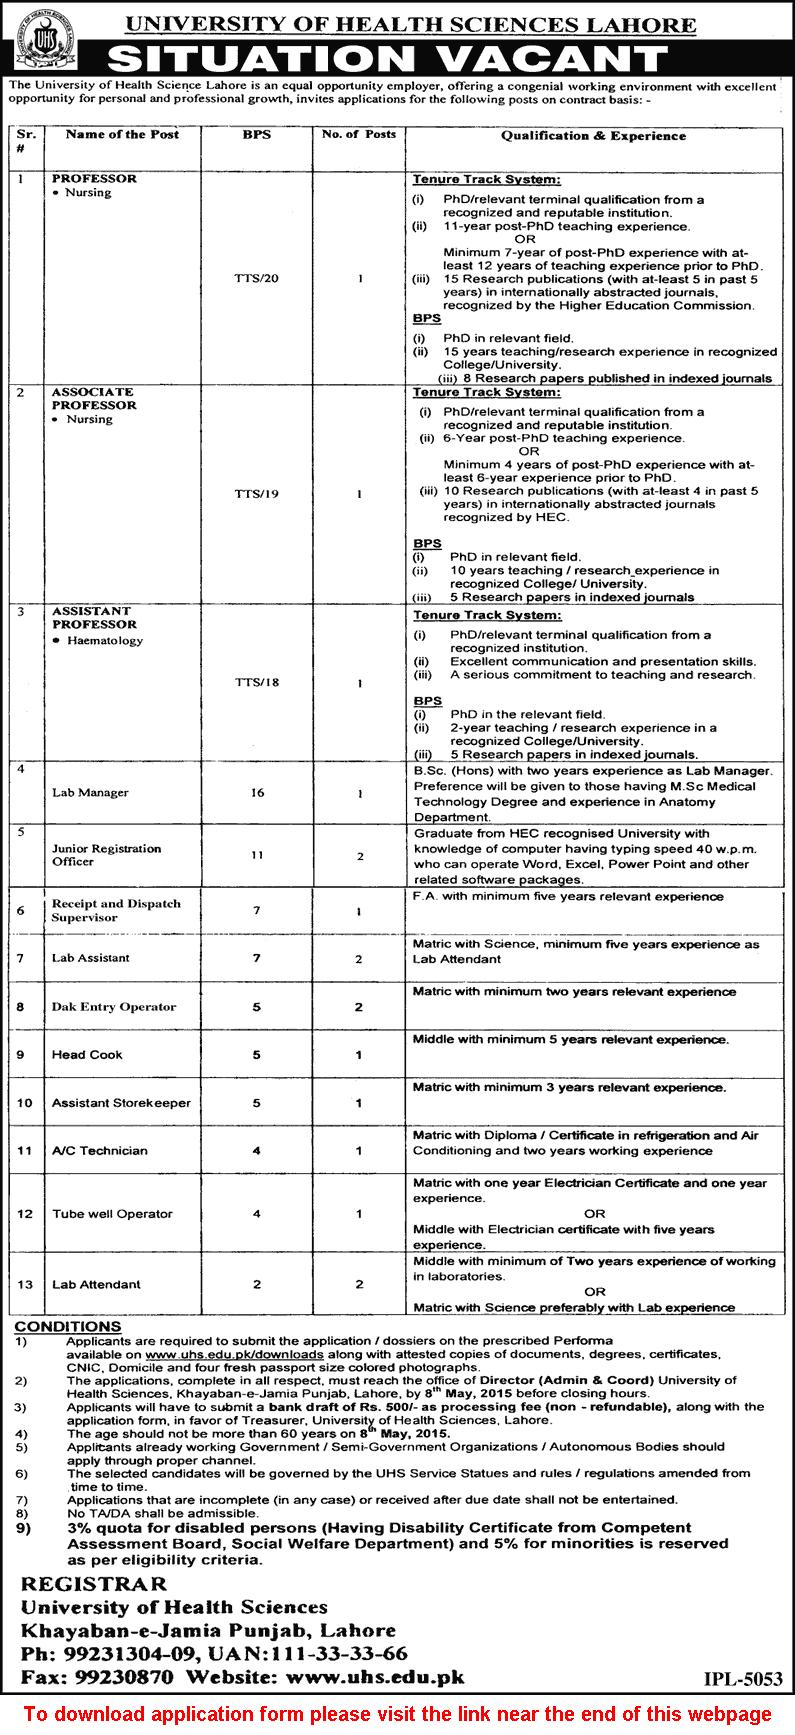 University of Health Sciences Lahore Jobs 2015 April Teaching / Medical Faculty, Admin & Support Staff